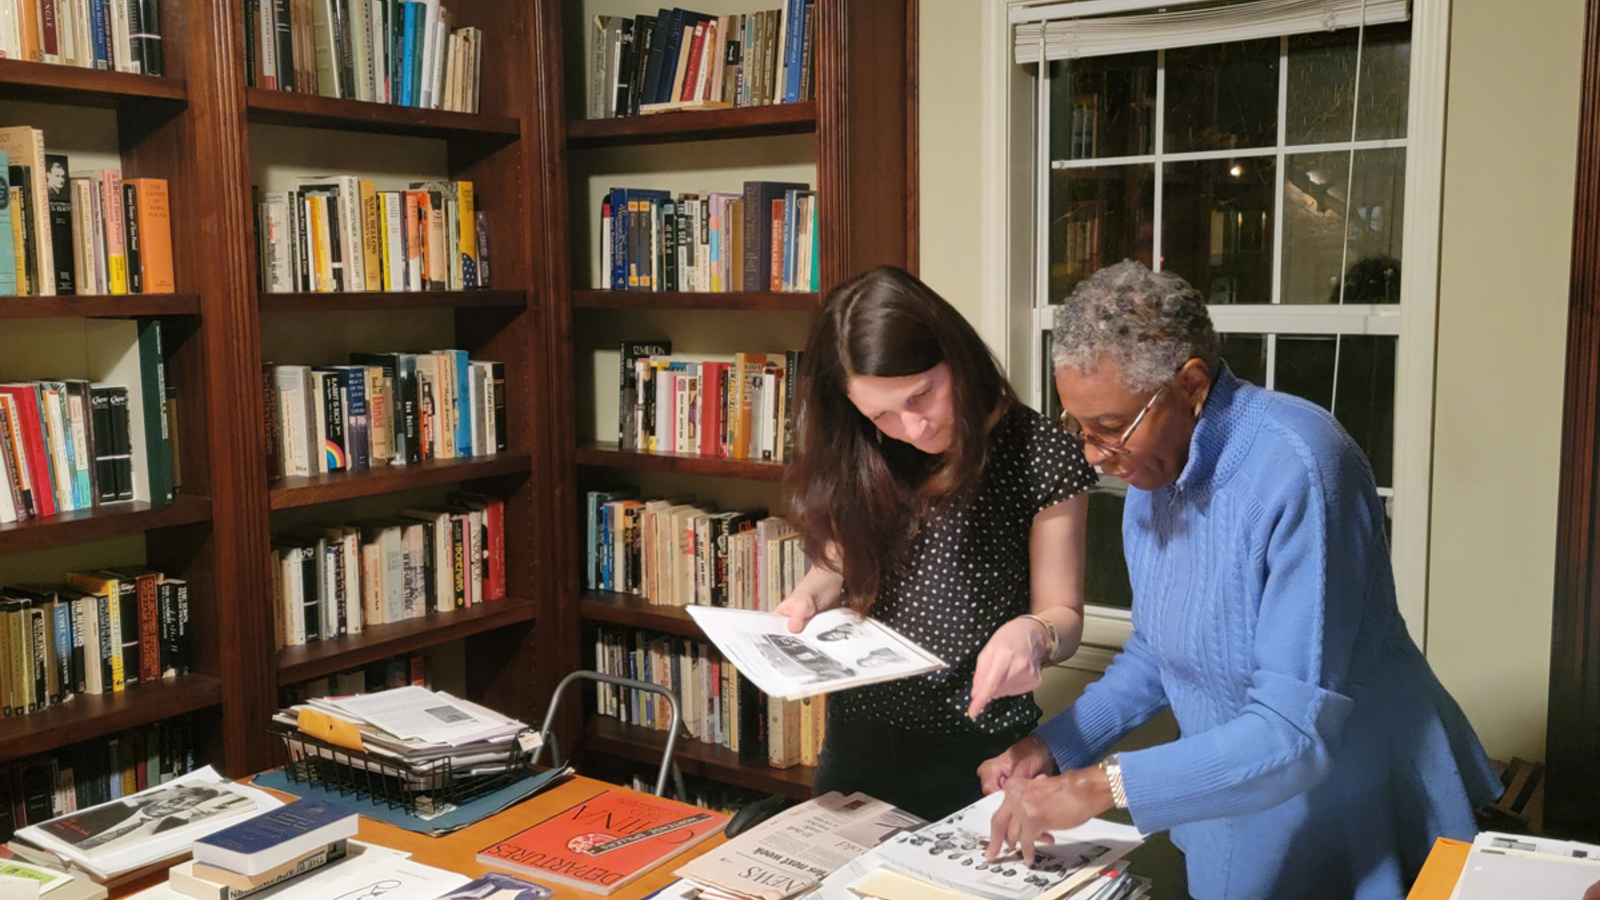 Hortense J. Spillers looking at materials in a library